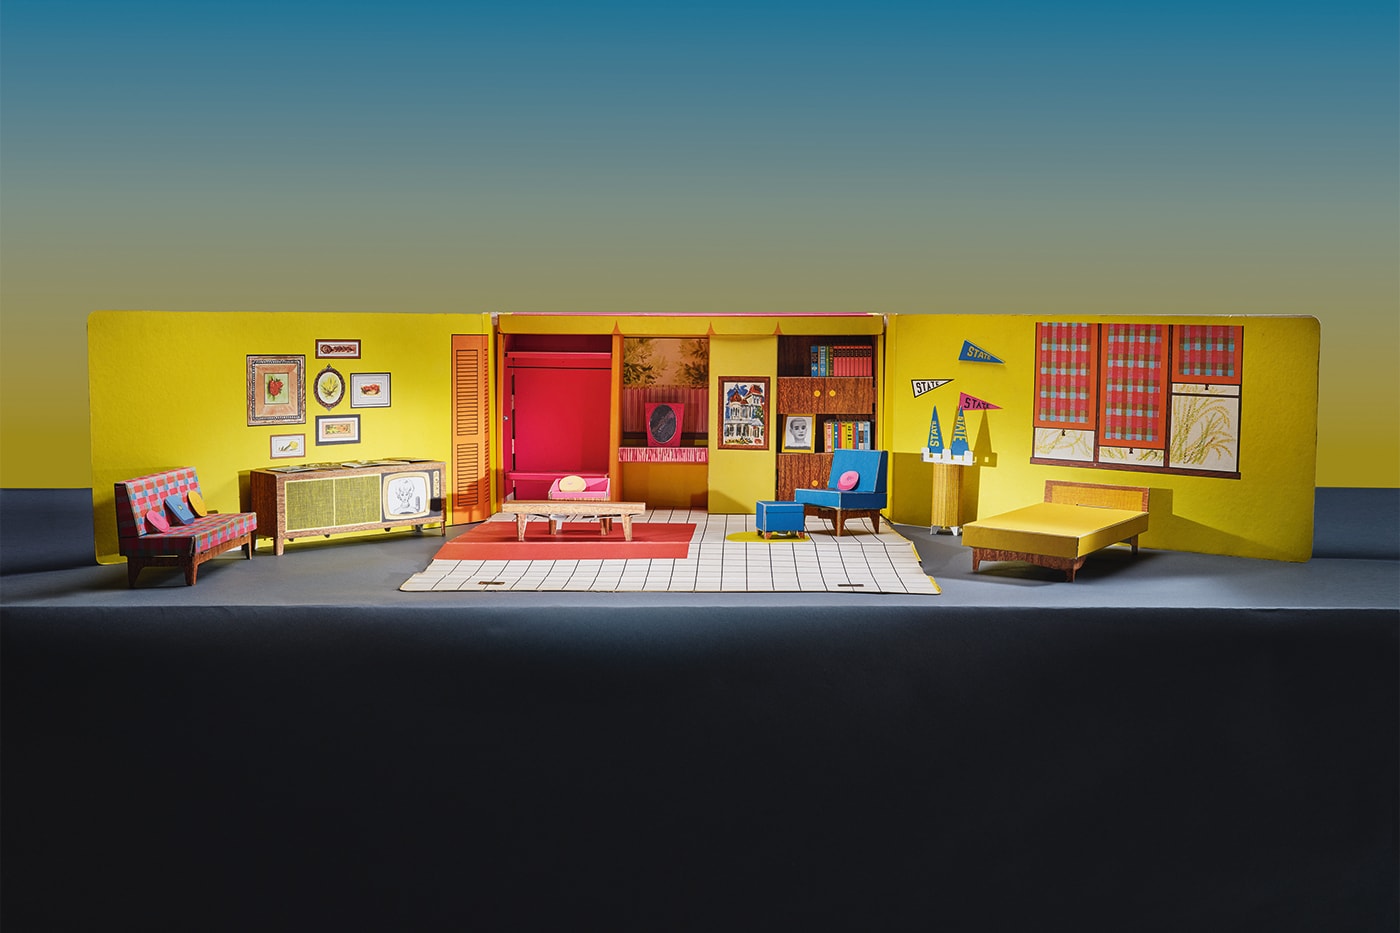 Take an architectural tour of Barbie's Dreamhouse Mattel Pin-Up